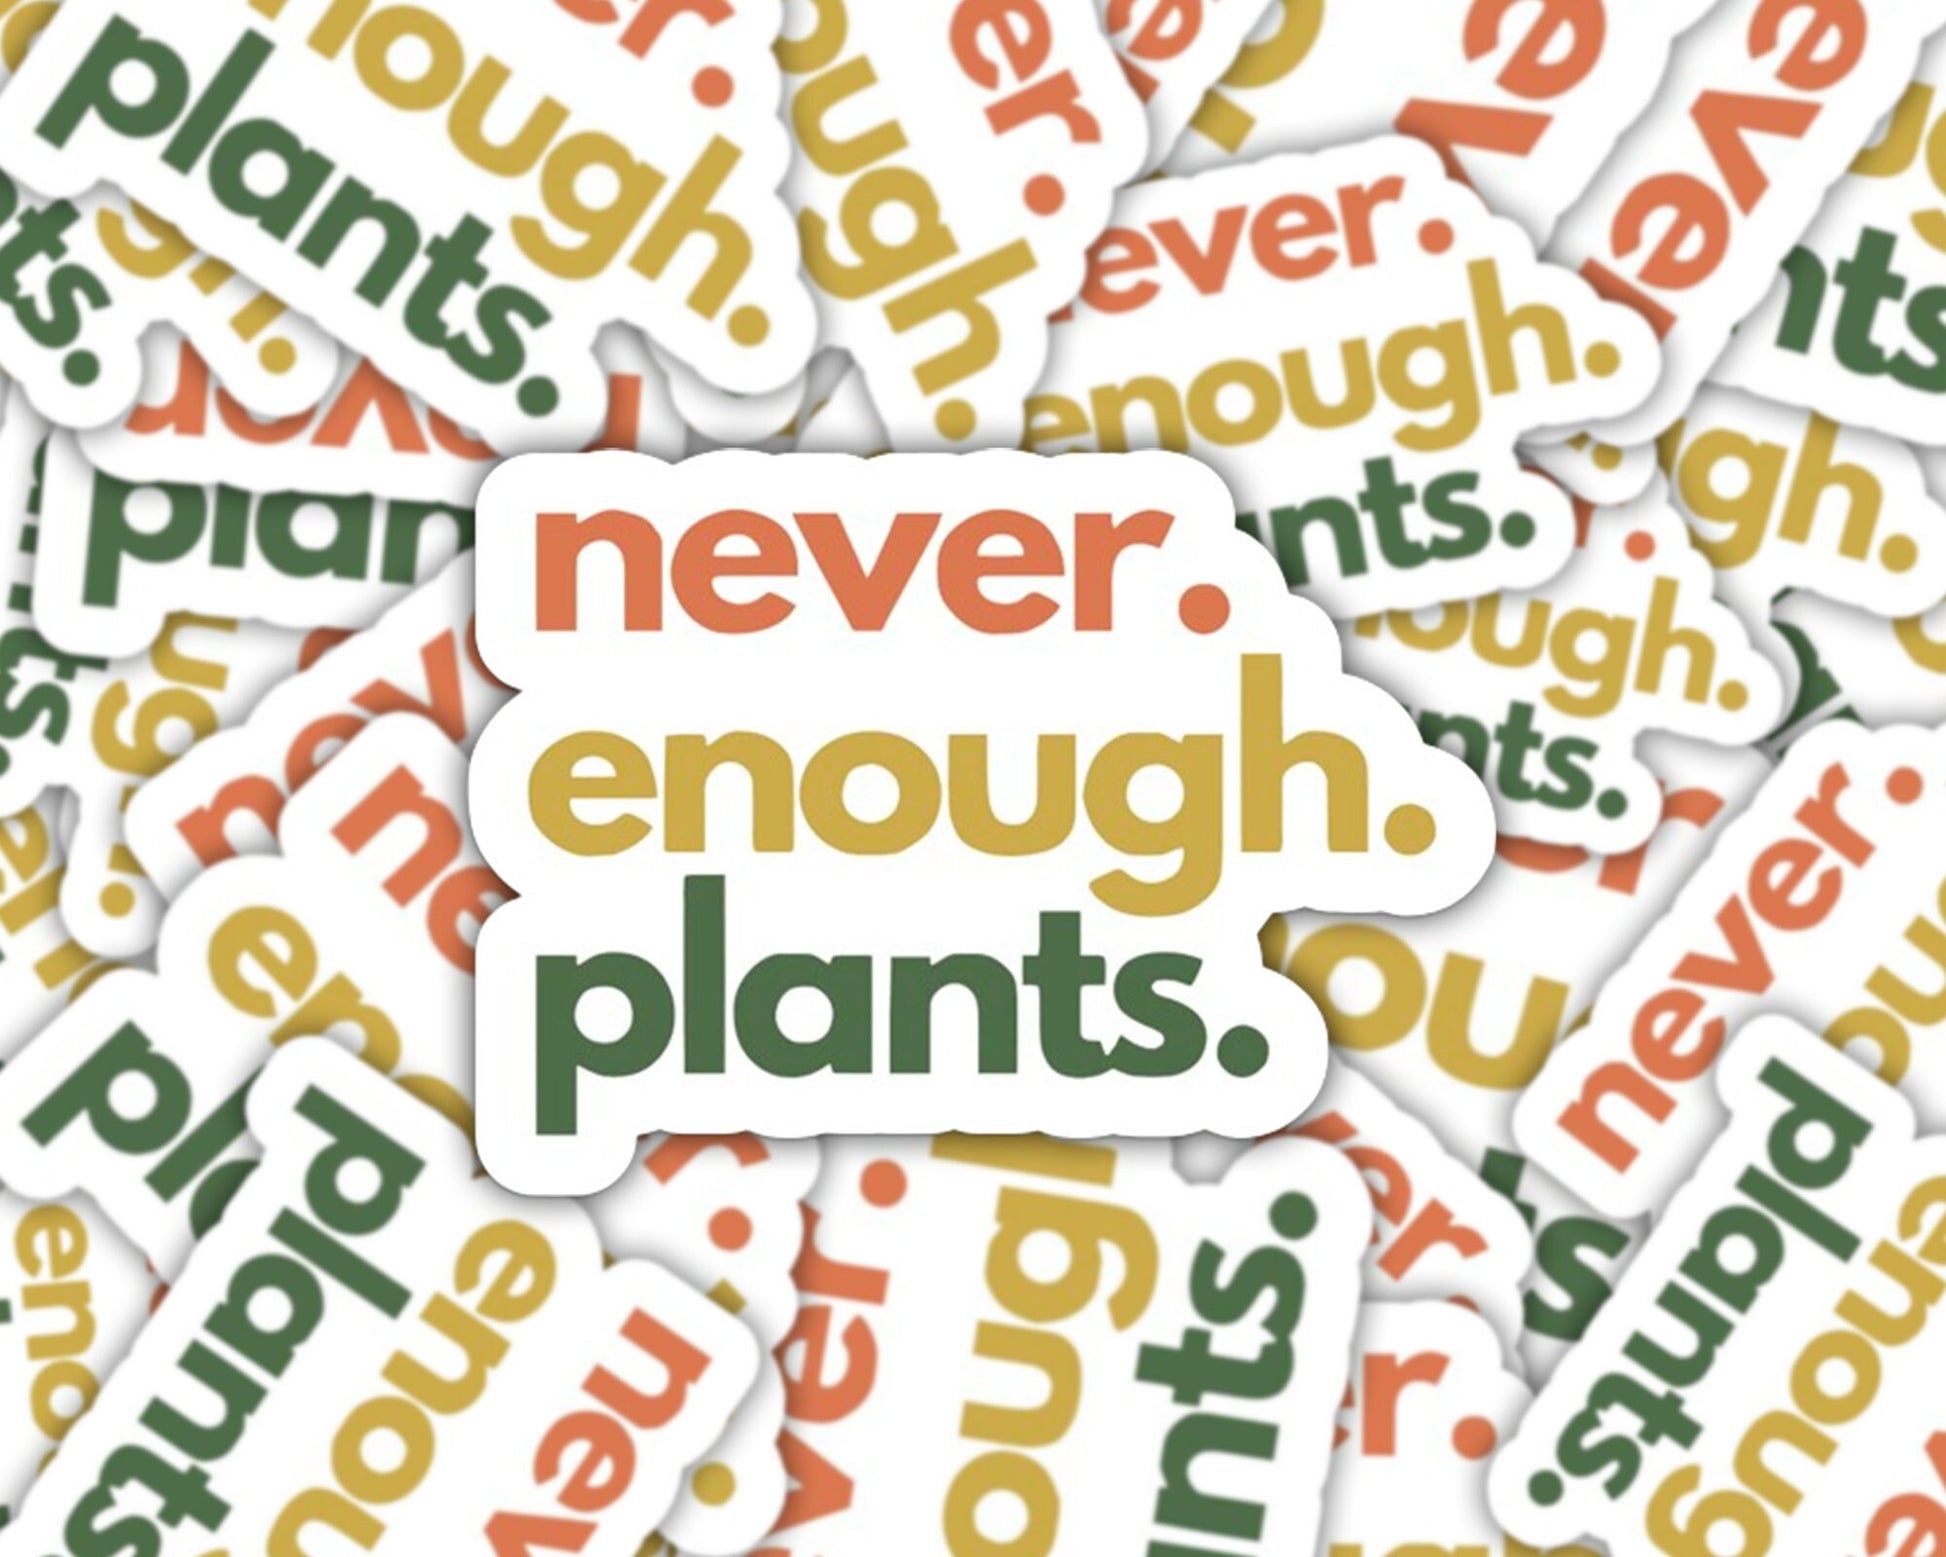 never enough plants, plant stickers, gifts for plant lovers, plant gifts, plant store, plant shop, monstera sticker, planter and pots